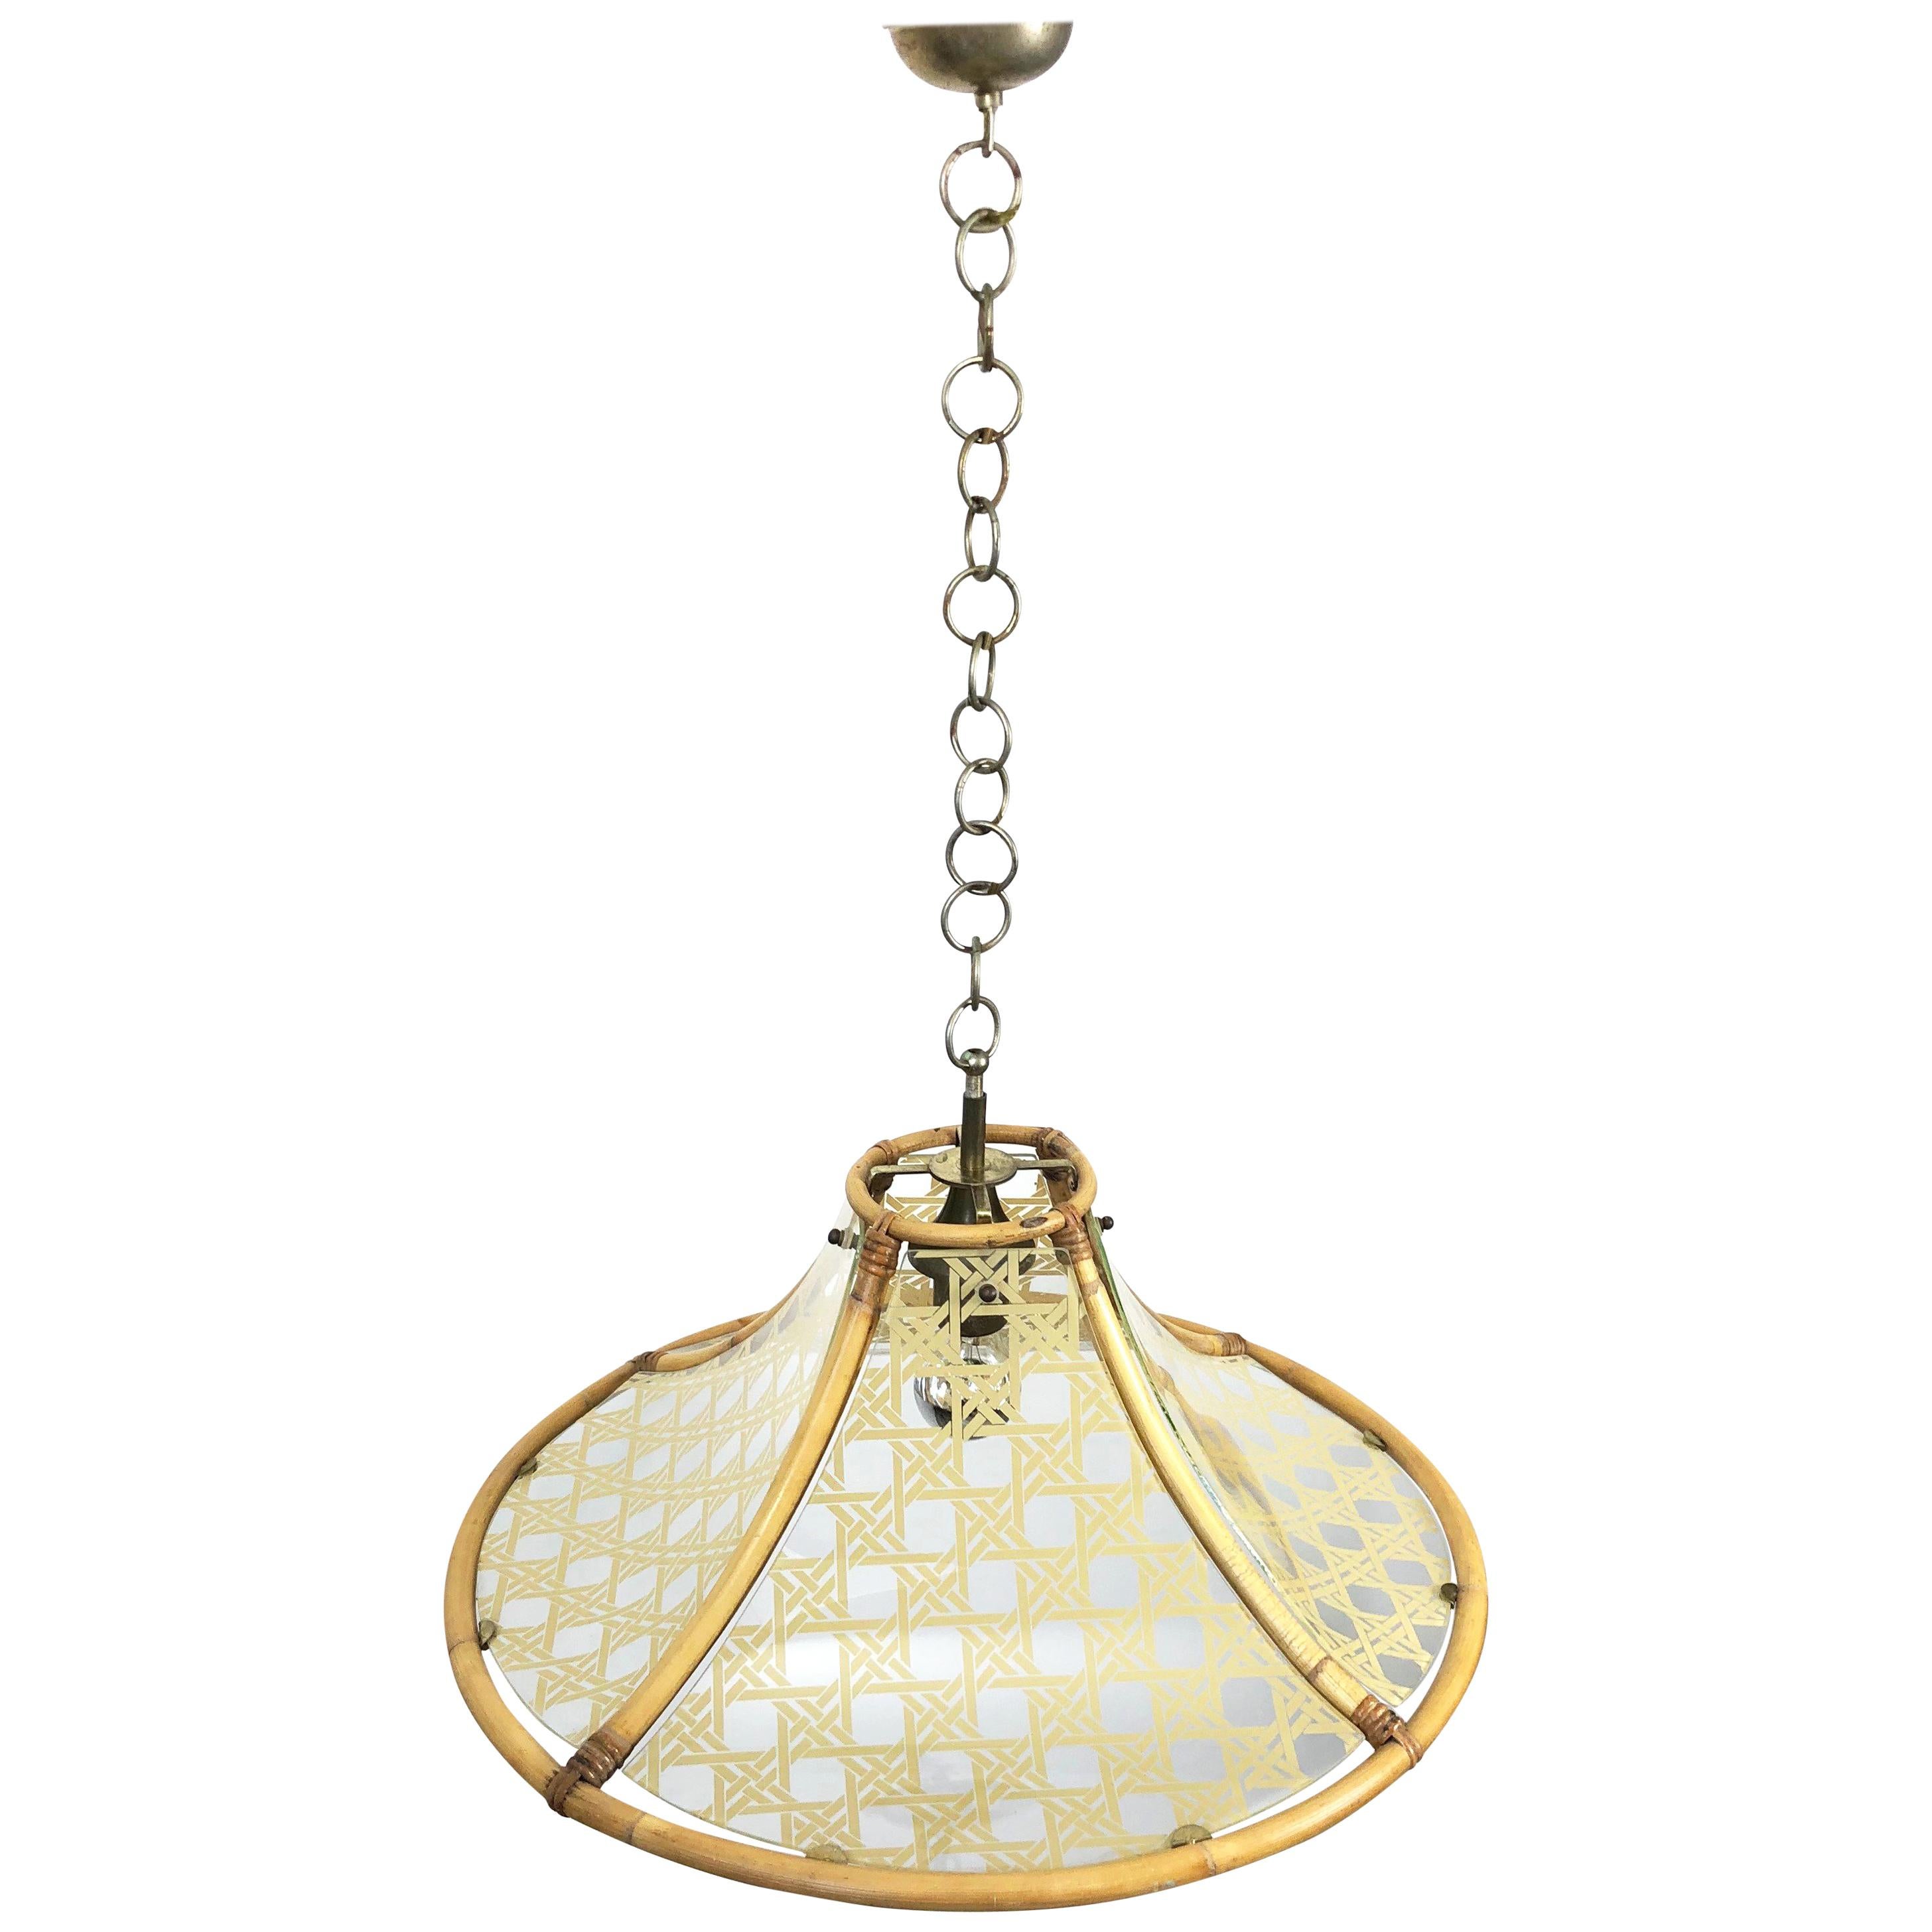 Chandelier in Bamboo, Glass and Rattan, Metal Pendant, Italy, 1960s For Sale